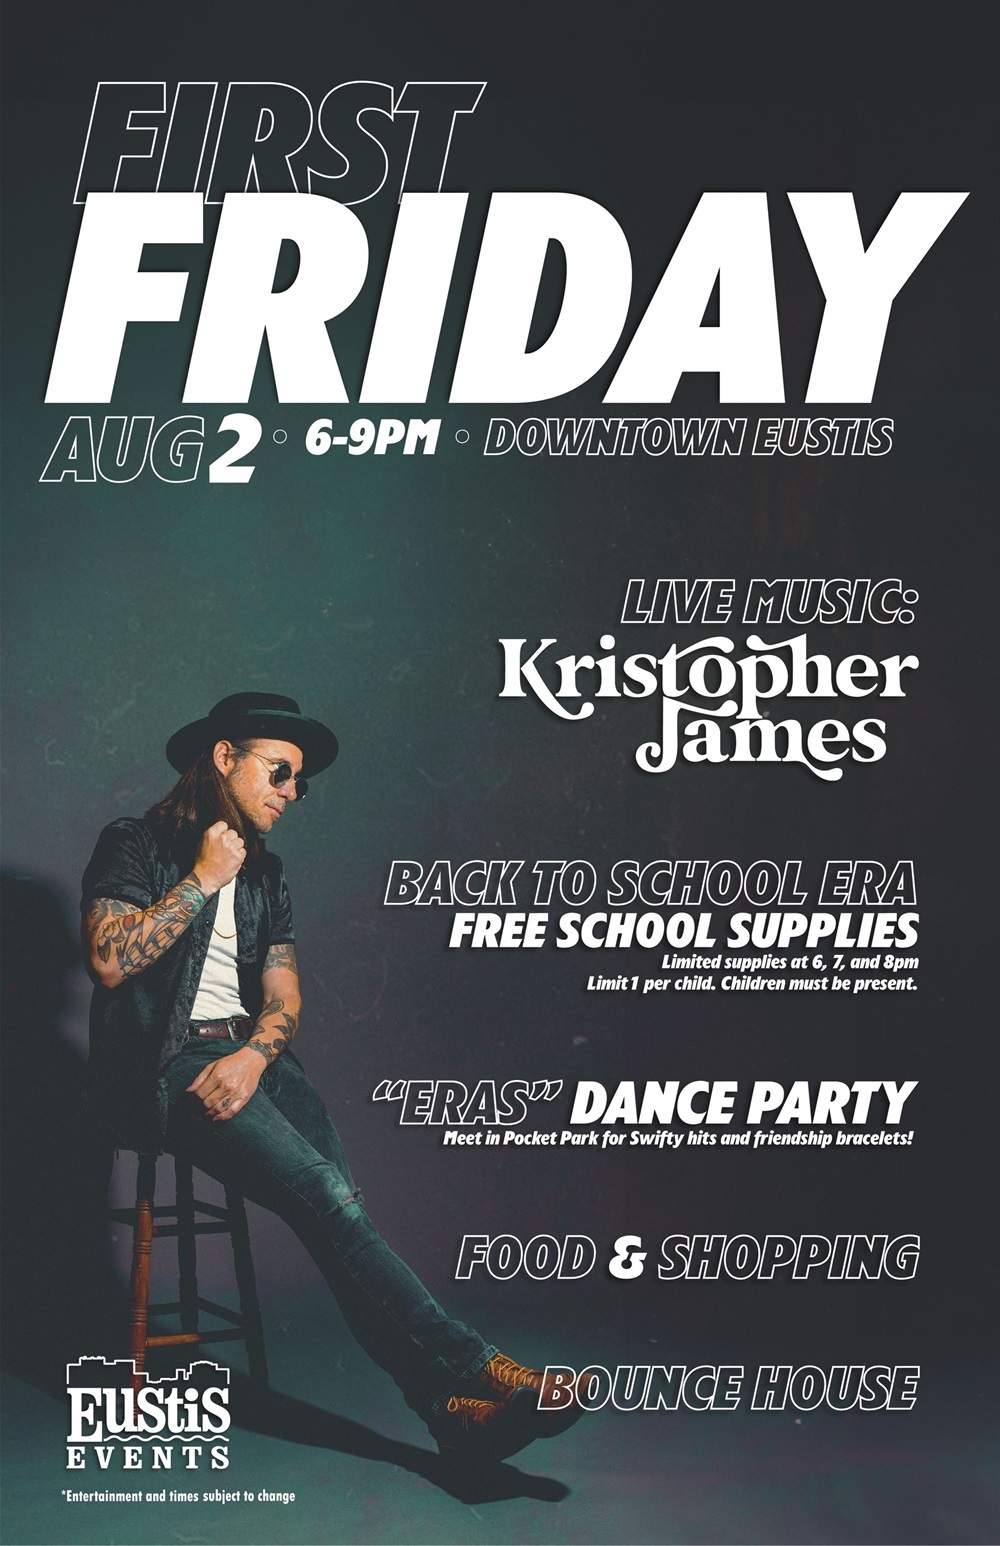 August First Friday will be on August 2nd from 6-9 PM. Live Music by Kristopher James, Back to school supplies, 